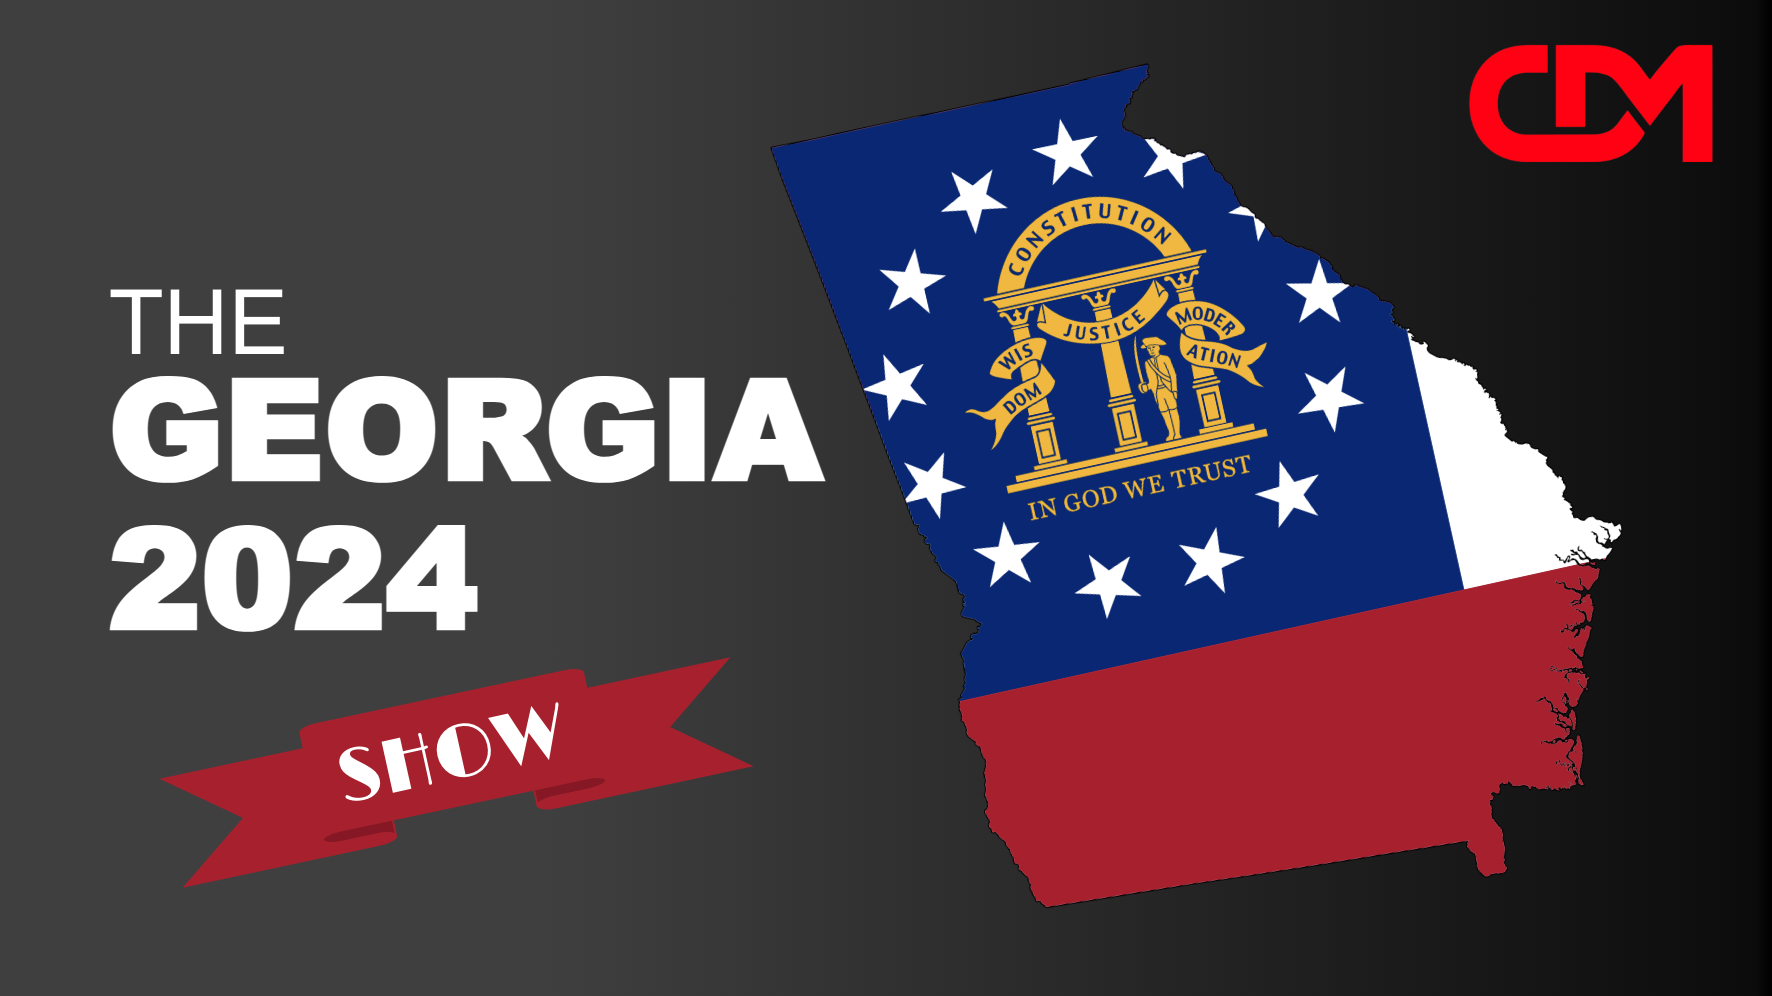 LIVE 2pm EST: The Georgia 2024 Show! A Voice Of Sanity With Father Troy Beecham